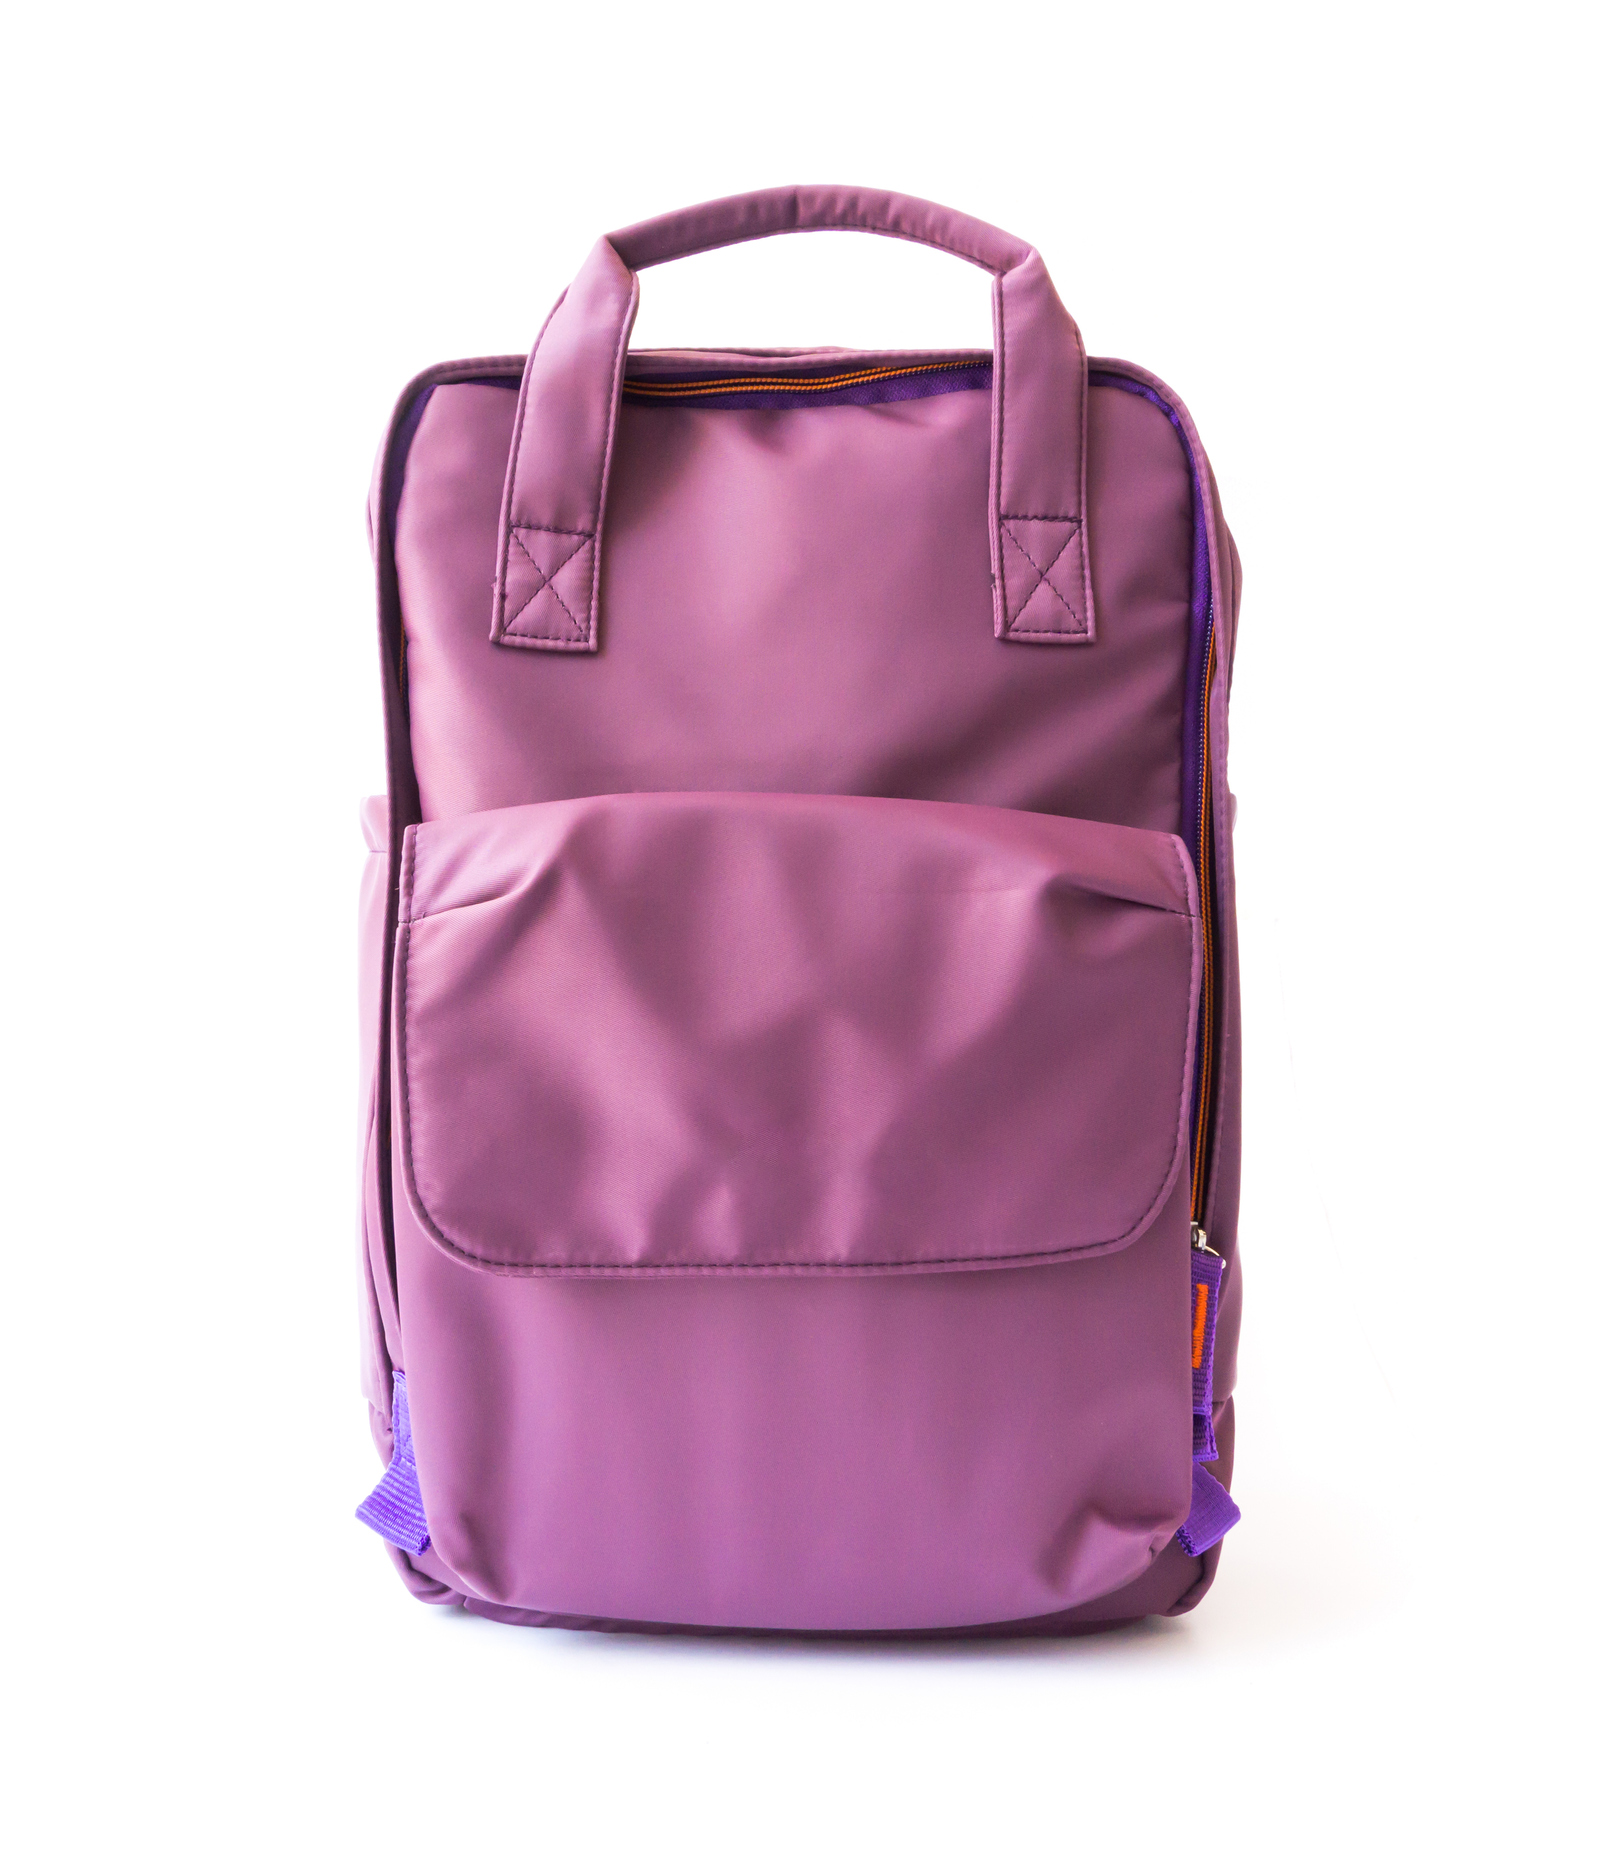 Close-Up Of Purple Backpack Against White Background